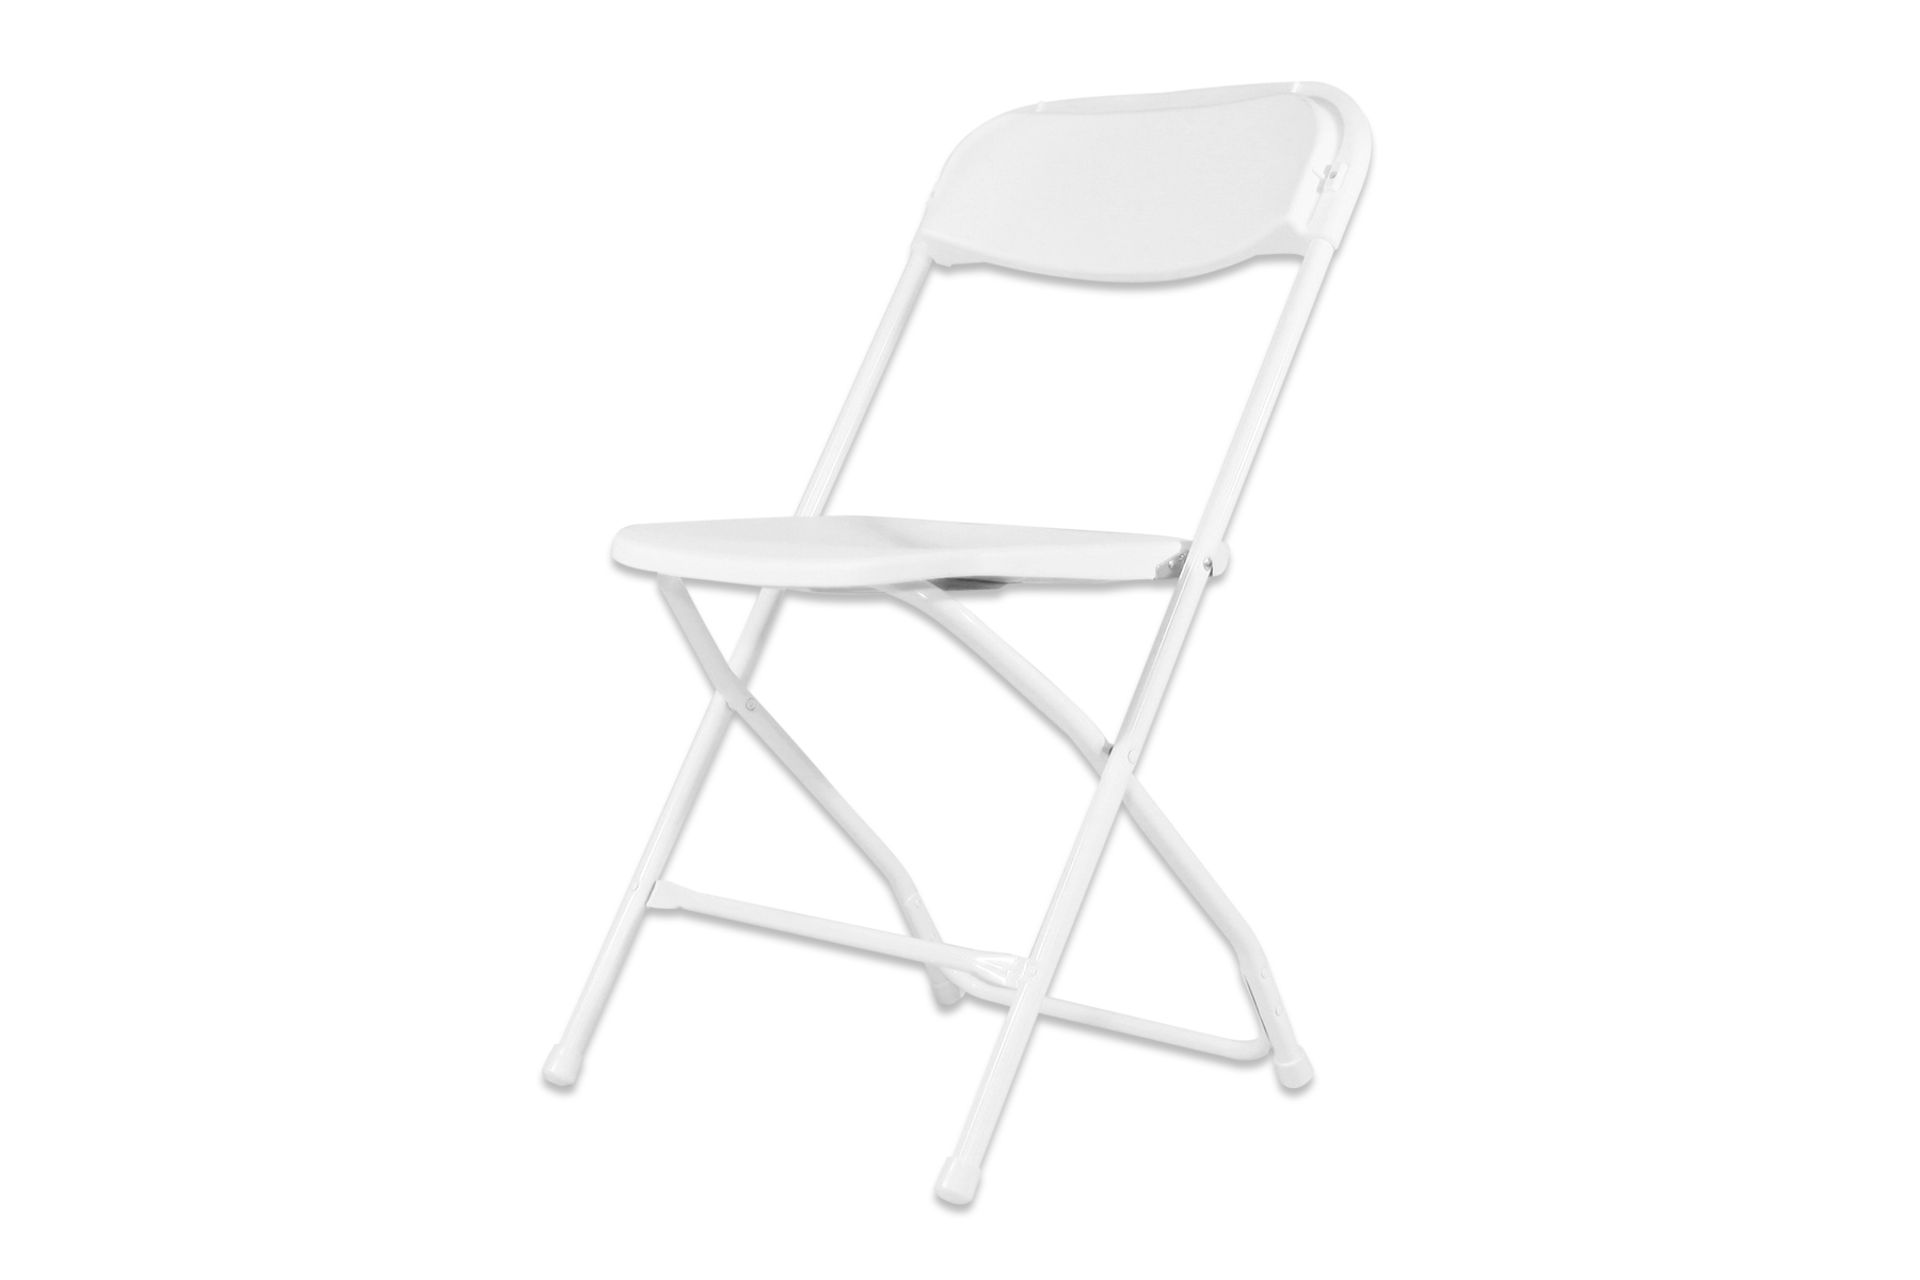 V *TRADE QTY* Grade A Folding Plastic Chair - White X150 YOUR BID PRICE TO BE MULTIPLIED BY ONE